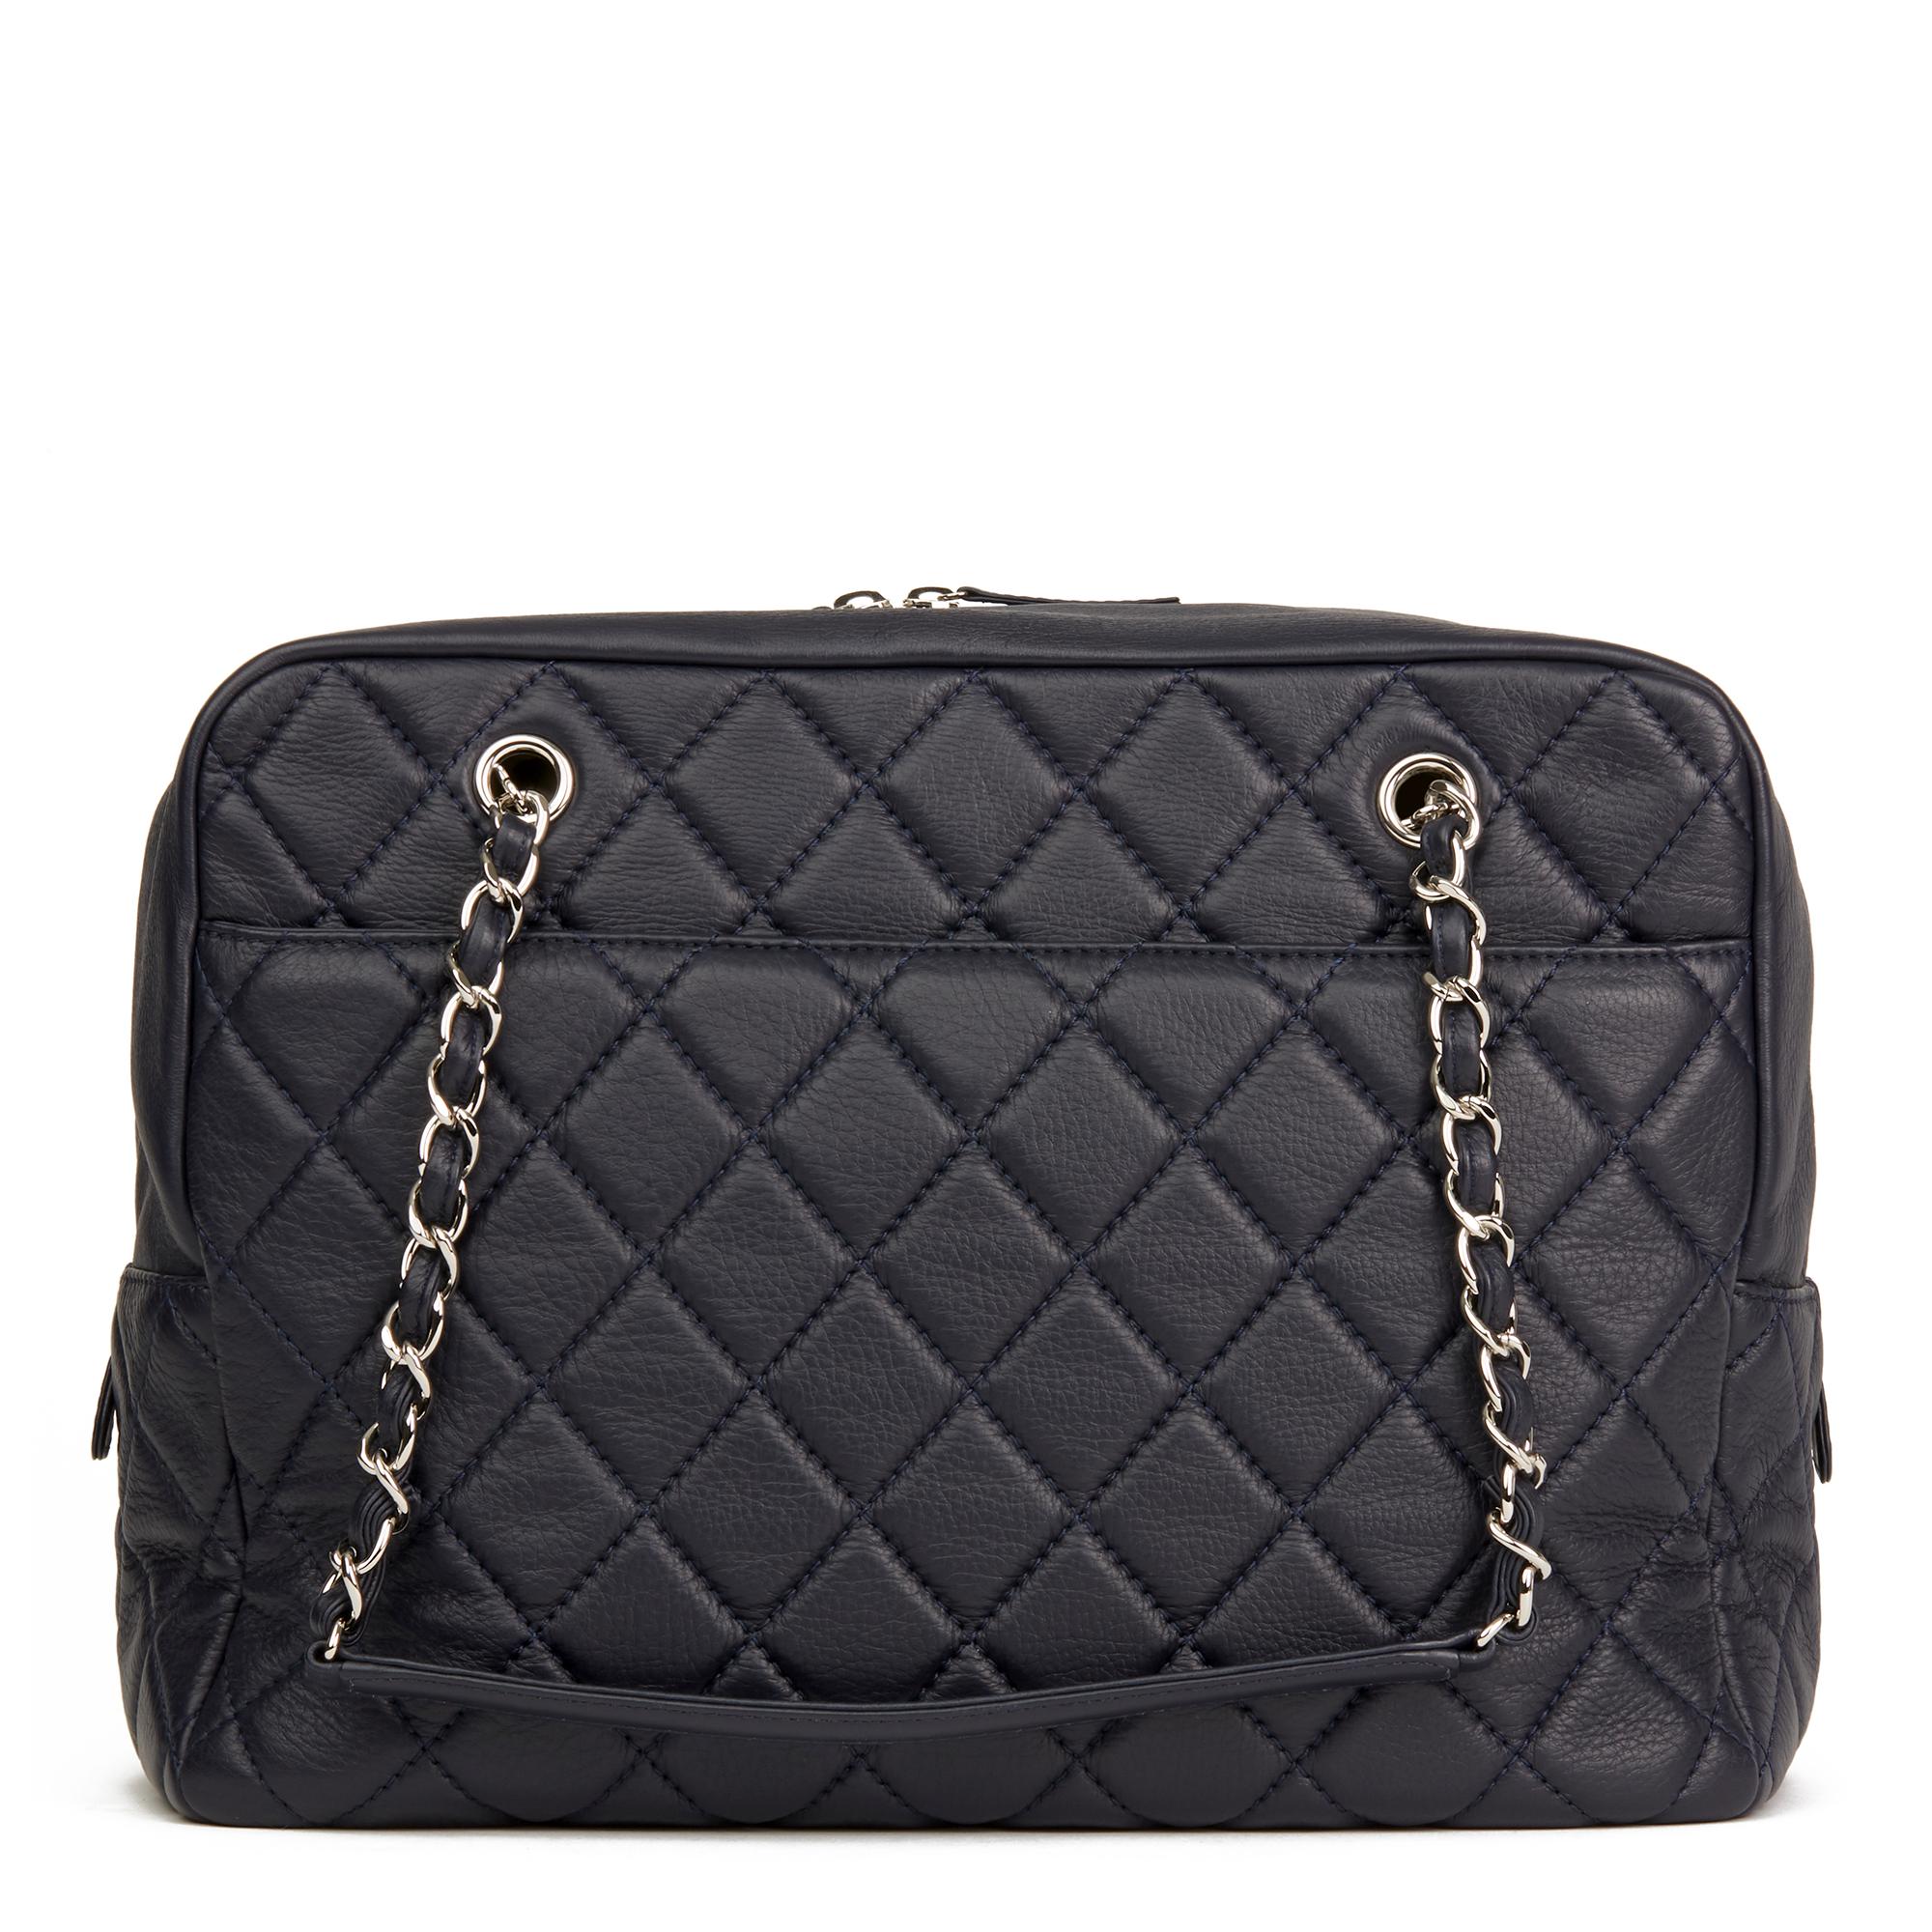 2016 Chanel Navy Quilted Calfskin Leather Jumbo Classic Camera Bag In Excellent Condition In Bishop's Stortford, Hertfordshire